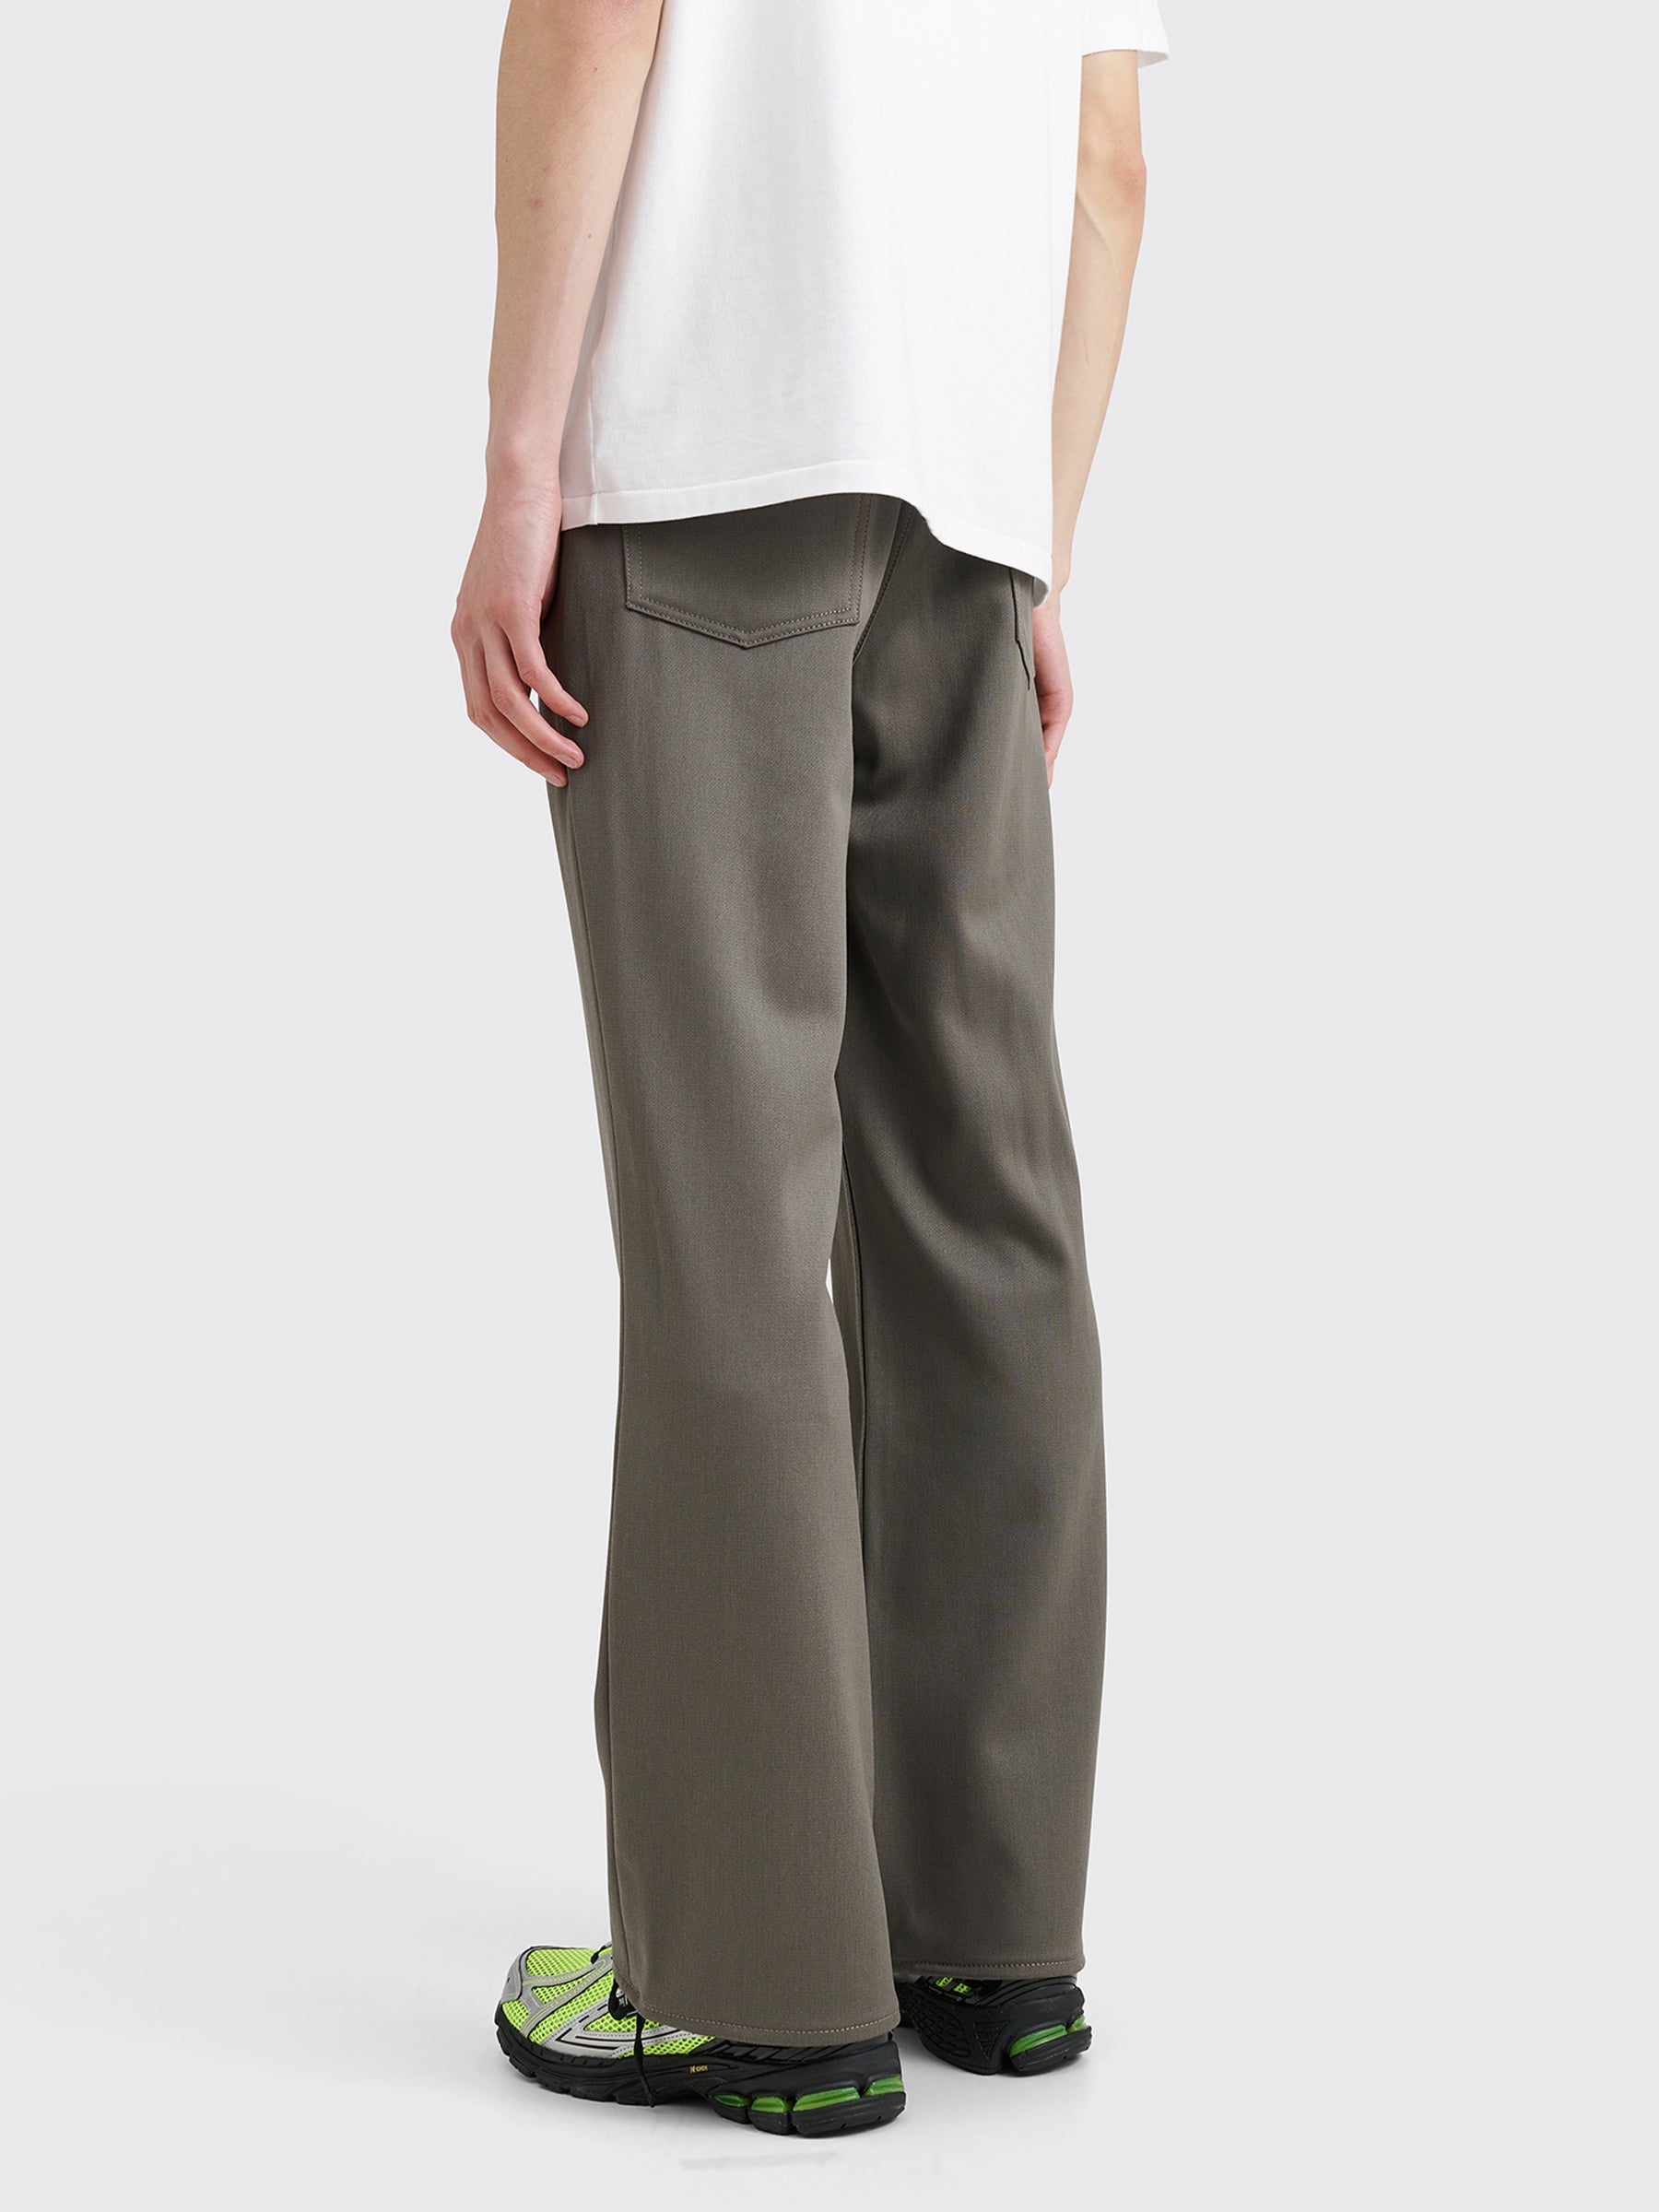 Our Legacy 70s Cut Pants Exquisite Wool Mole Grey